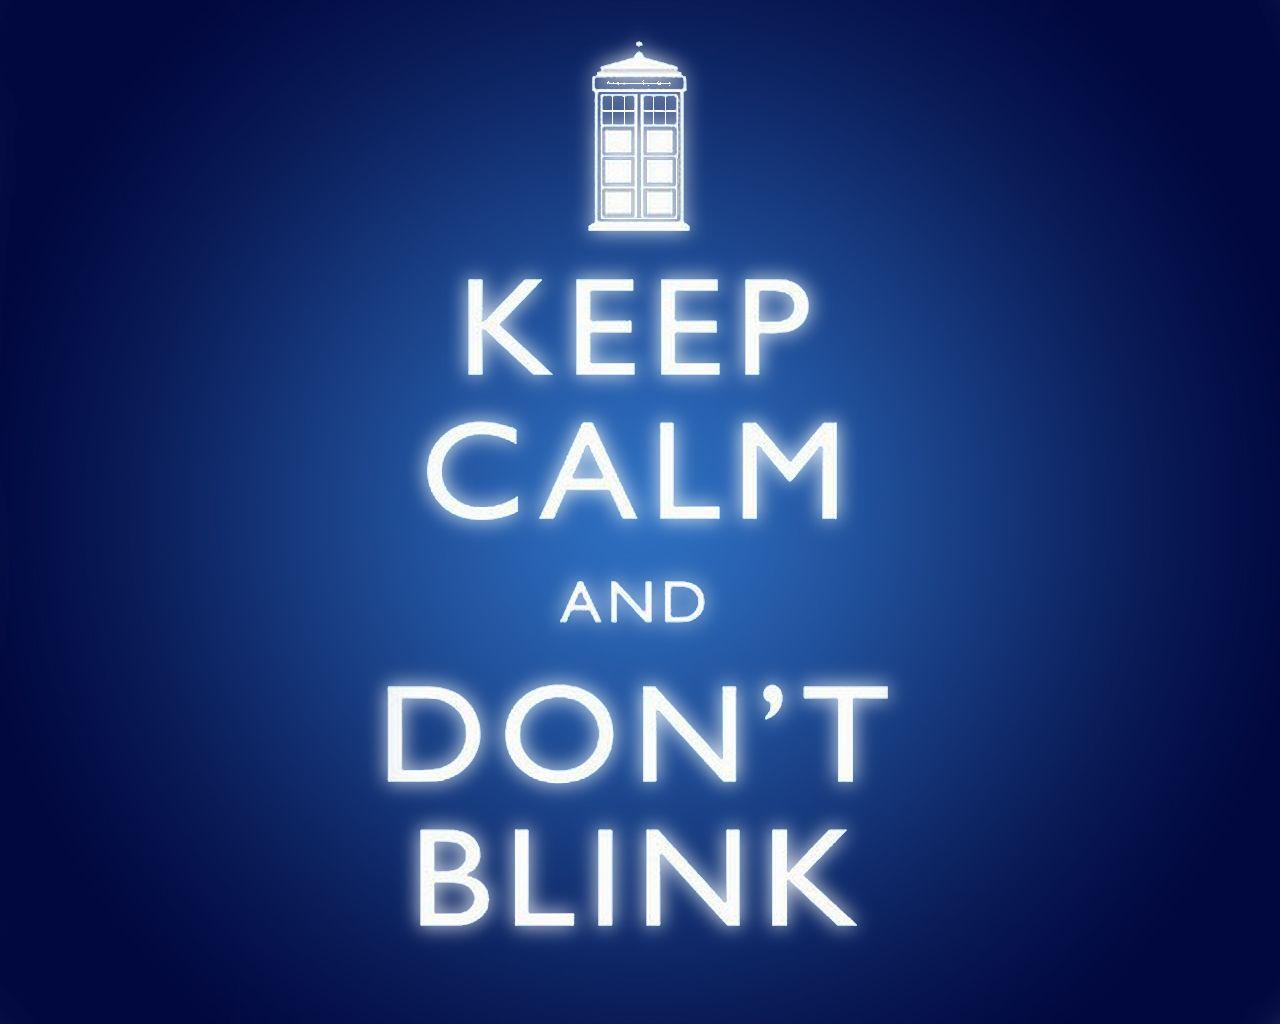 doctor who phone wallpaper. Samsung Galaxy S4 Active Smartphone Blog